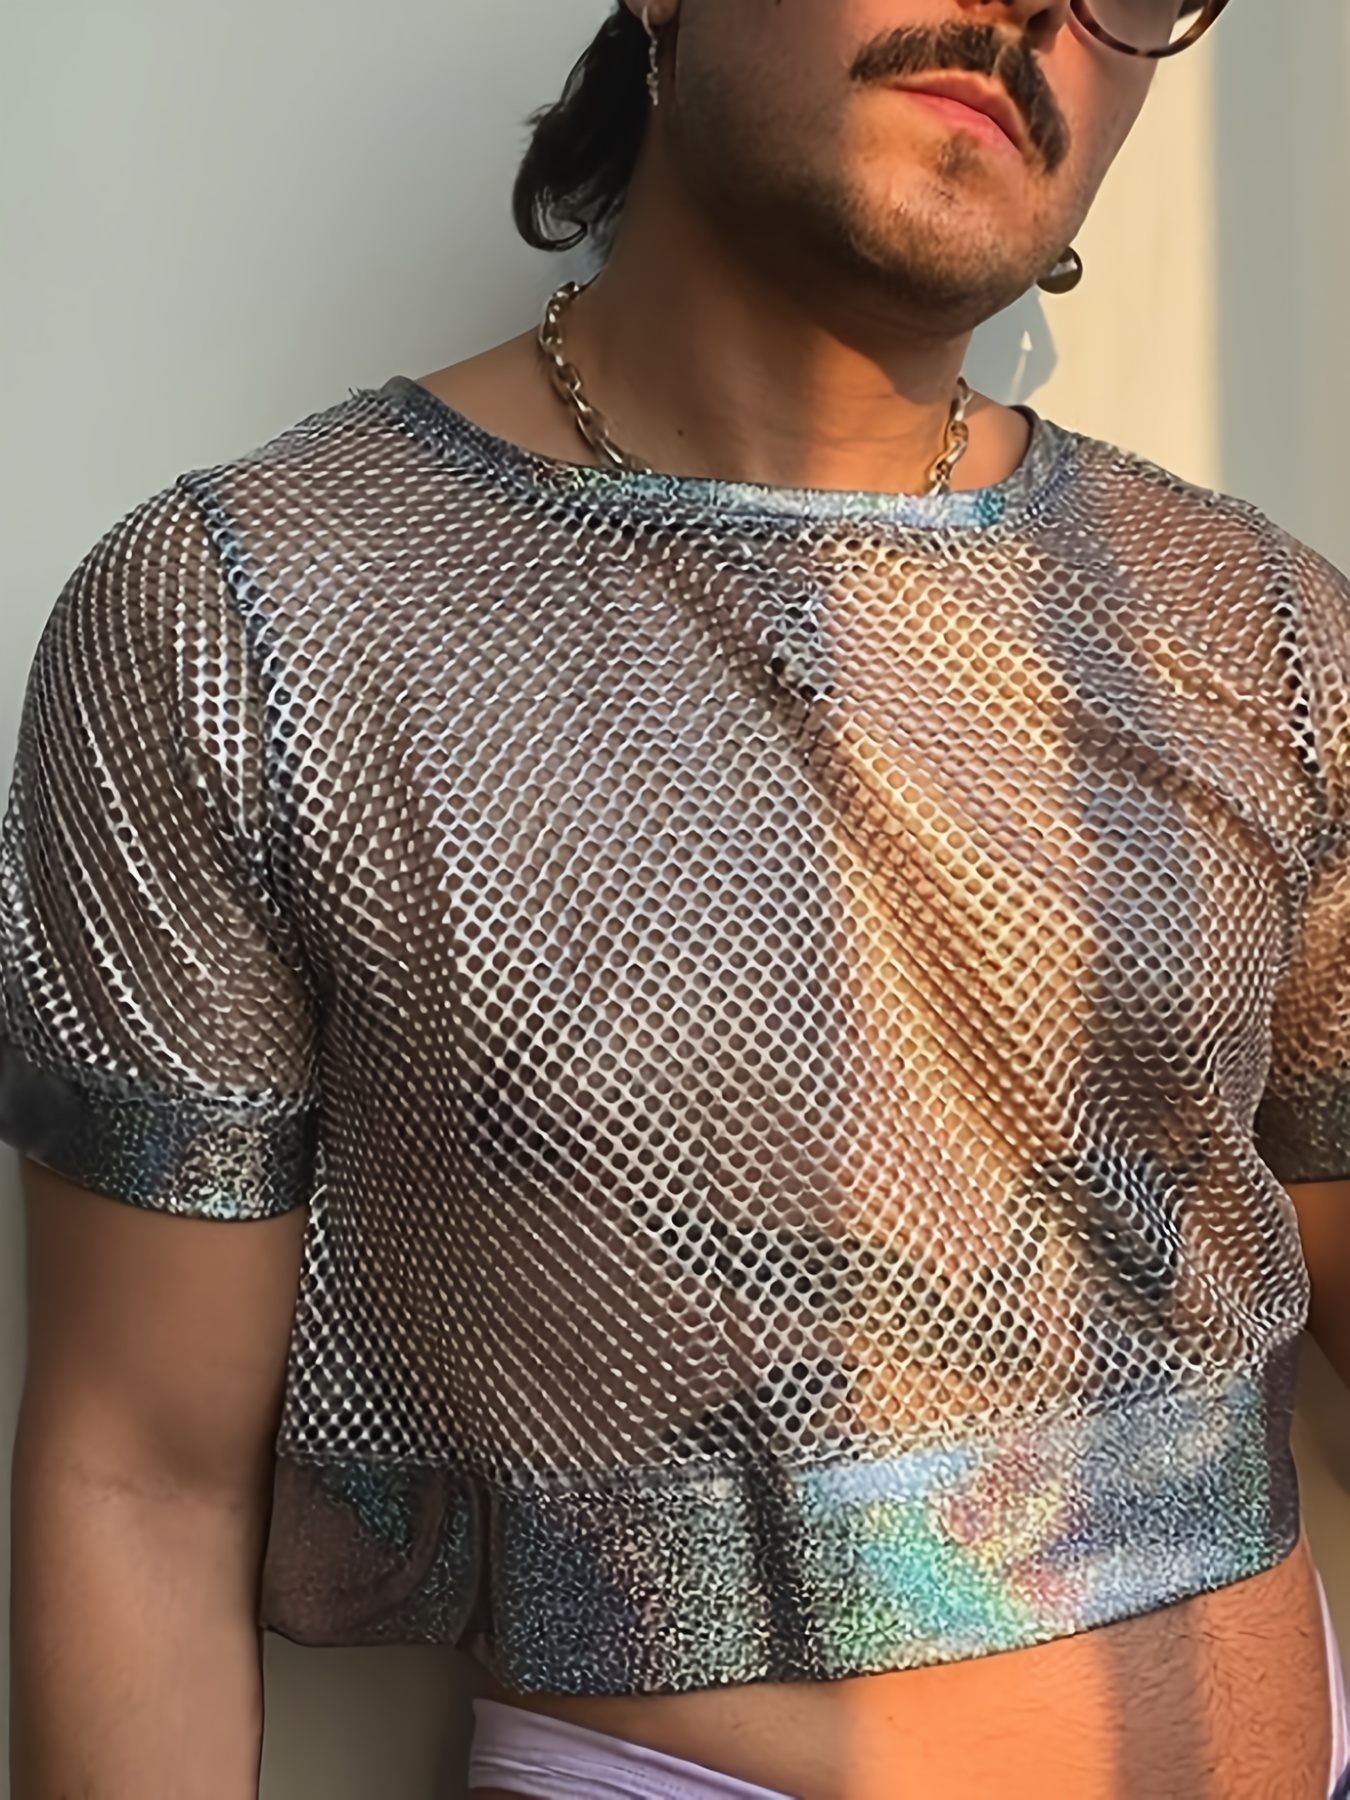 Huakaishijie Men Fishnet Top Mesh See Through Hollow Out Muscle T